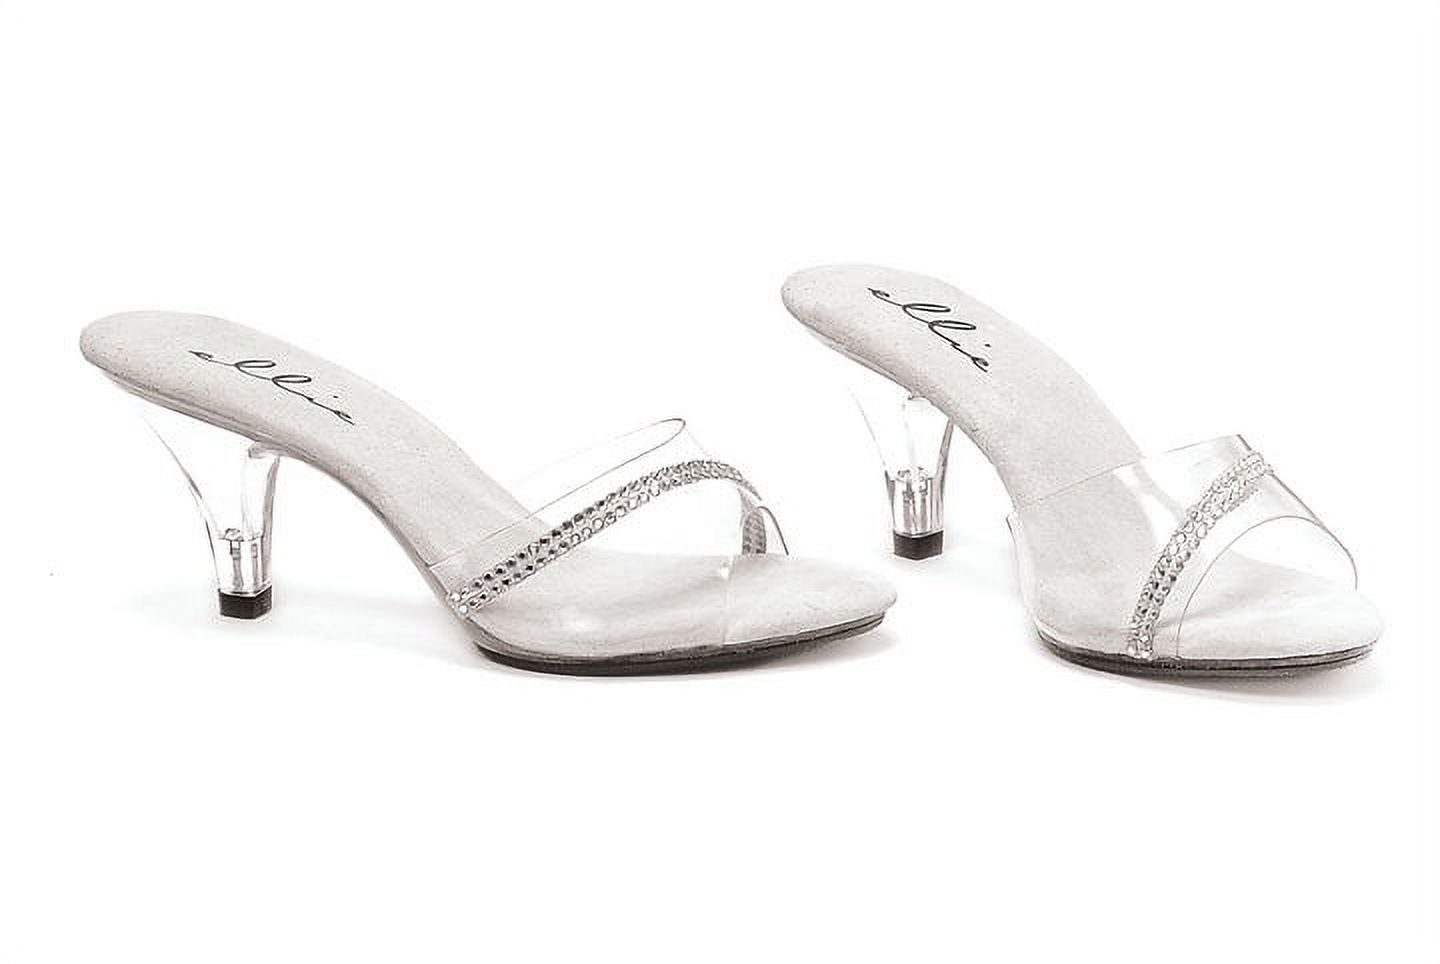 Ellie Shoes E-305-Jesse 3 Heel Clear Mule with Rhinestones Clear / 15 - image 3 of 3